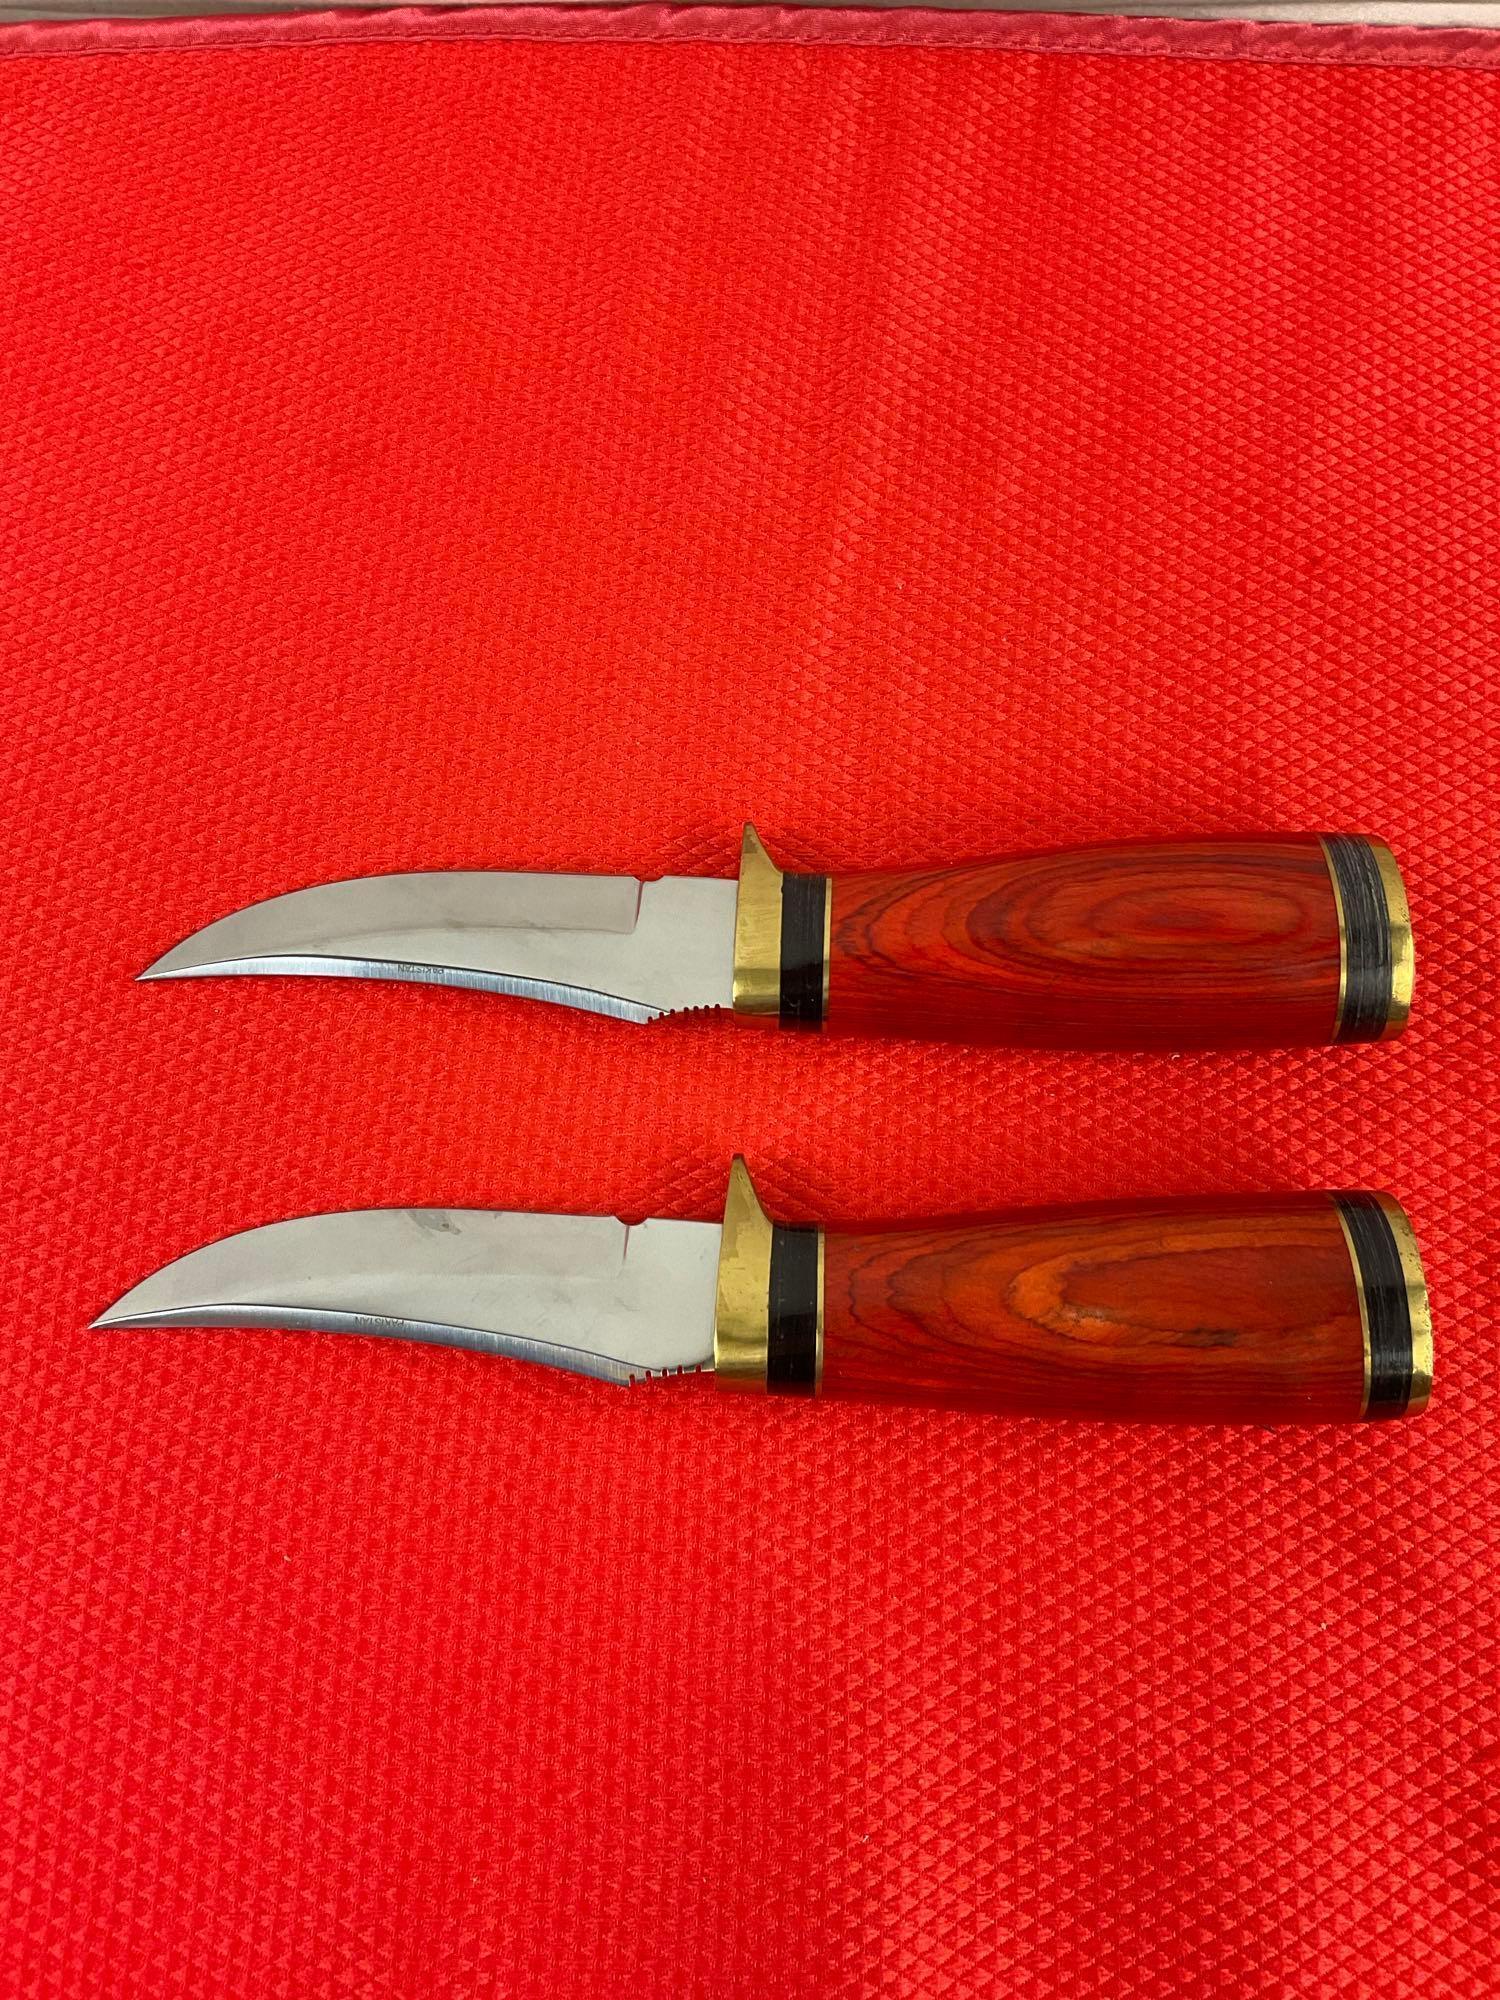 Pair of Pakistan Made 4" Stainless Steel Skinner Knives w/ Sheathes Model No. DH-8003. NIB. See